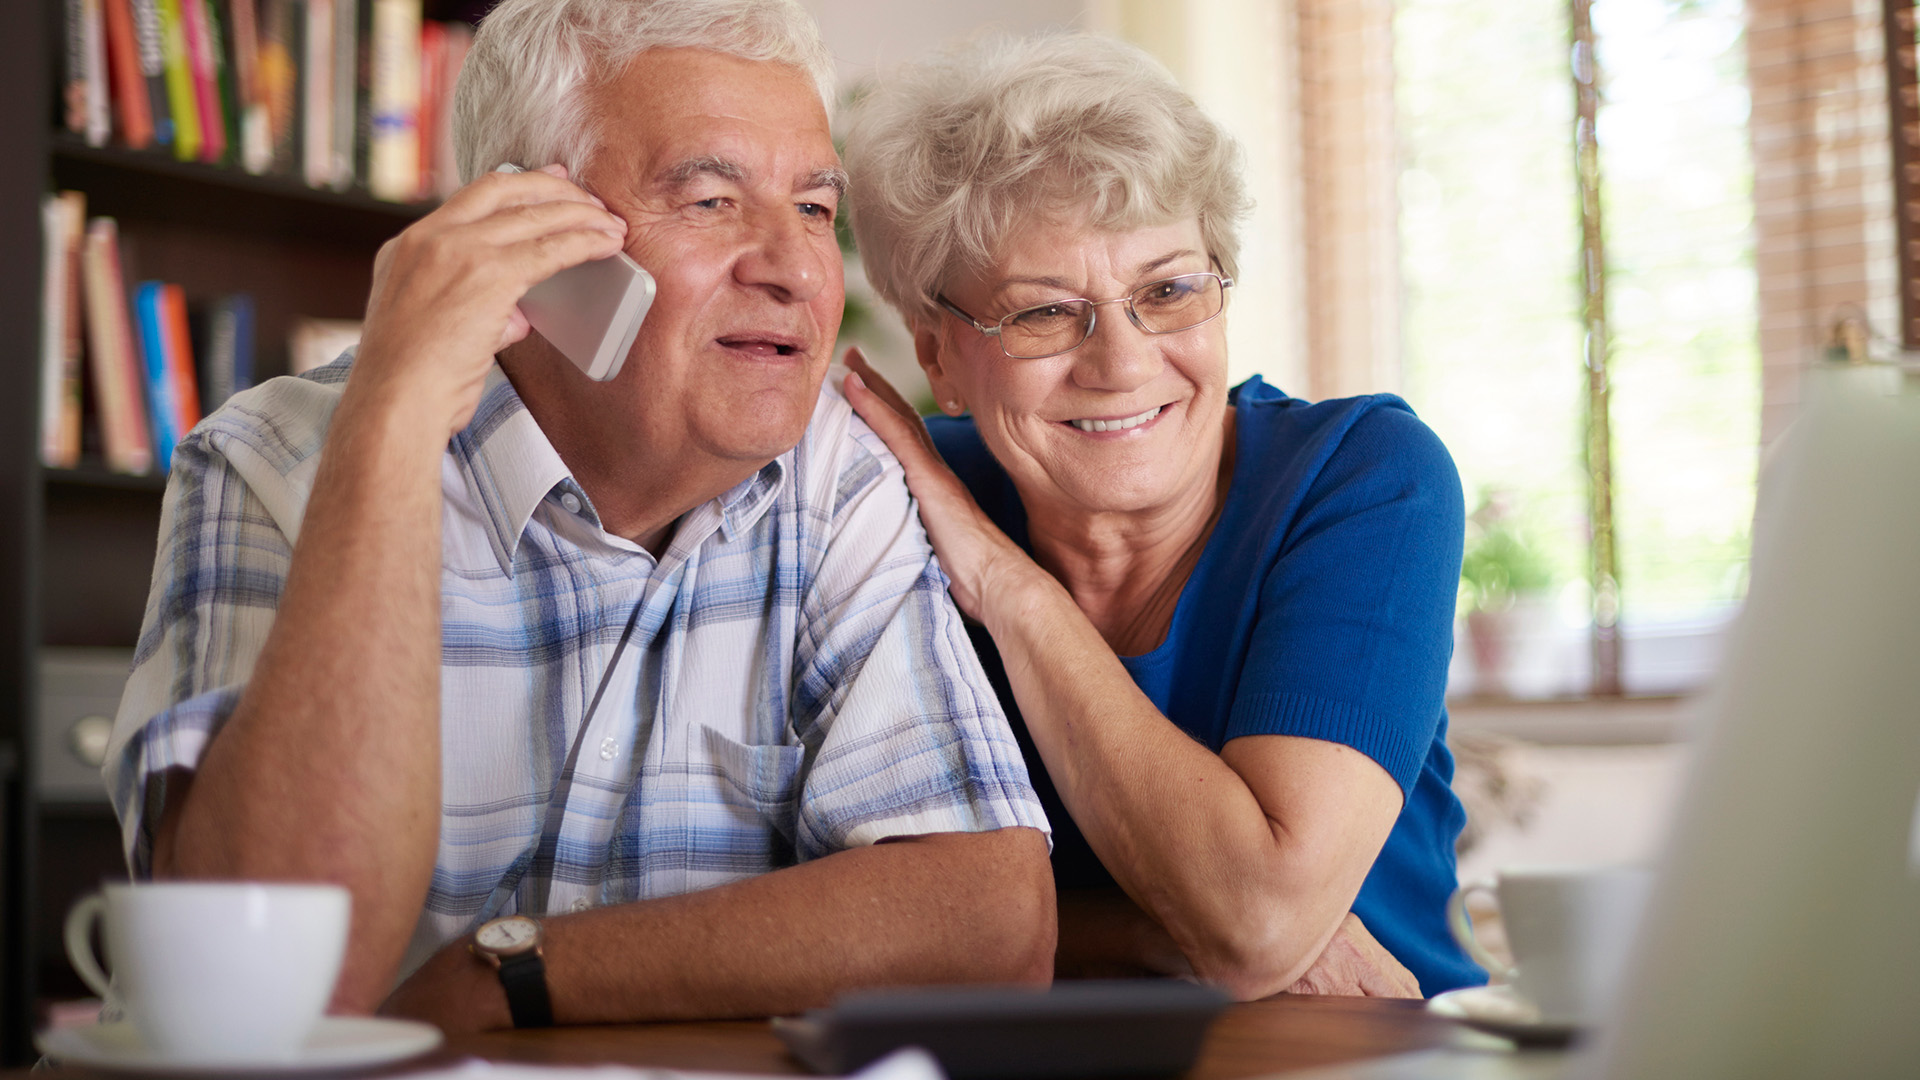 Featured image for “How to Find and Research Senior Living Communities Near Me”